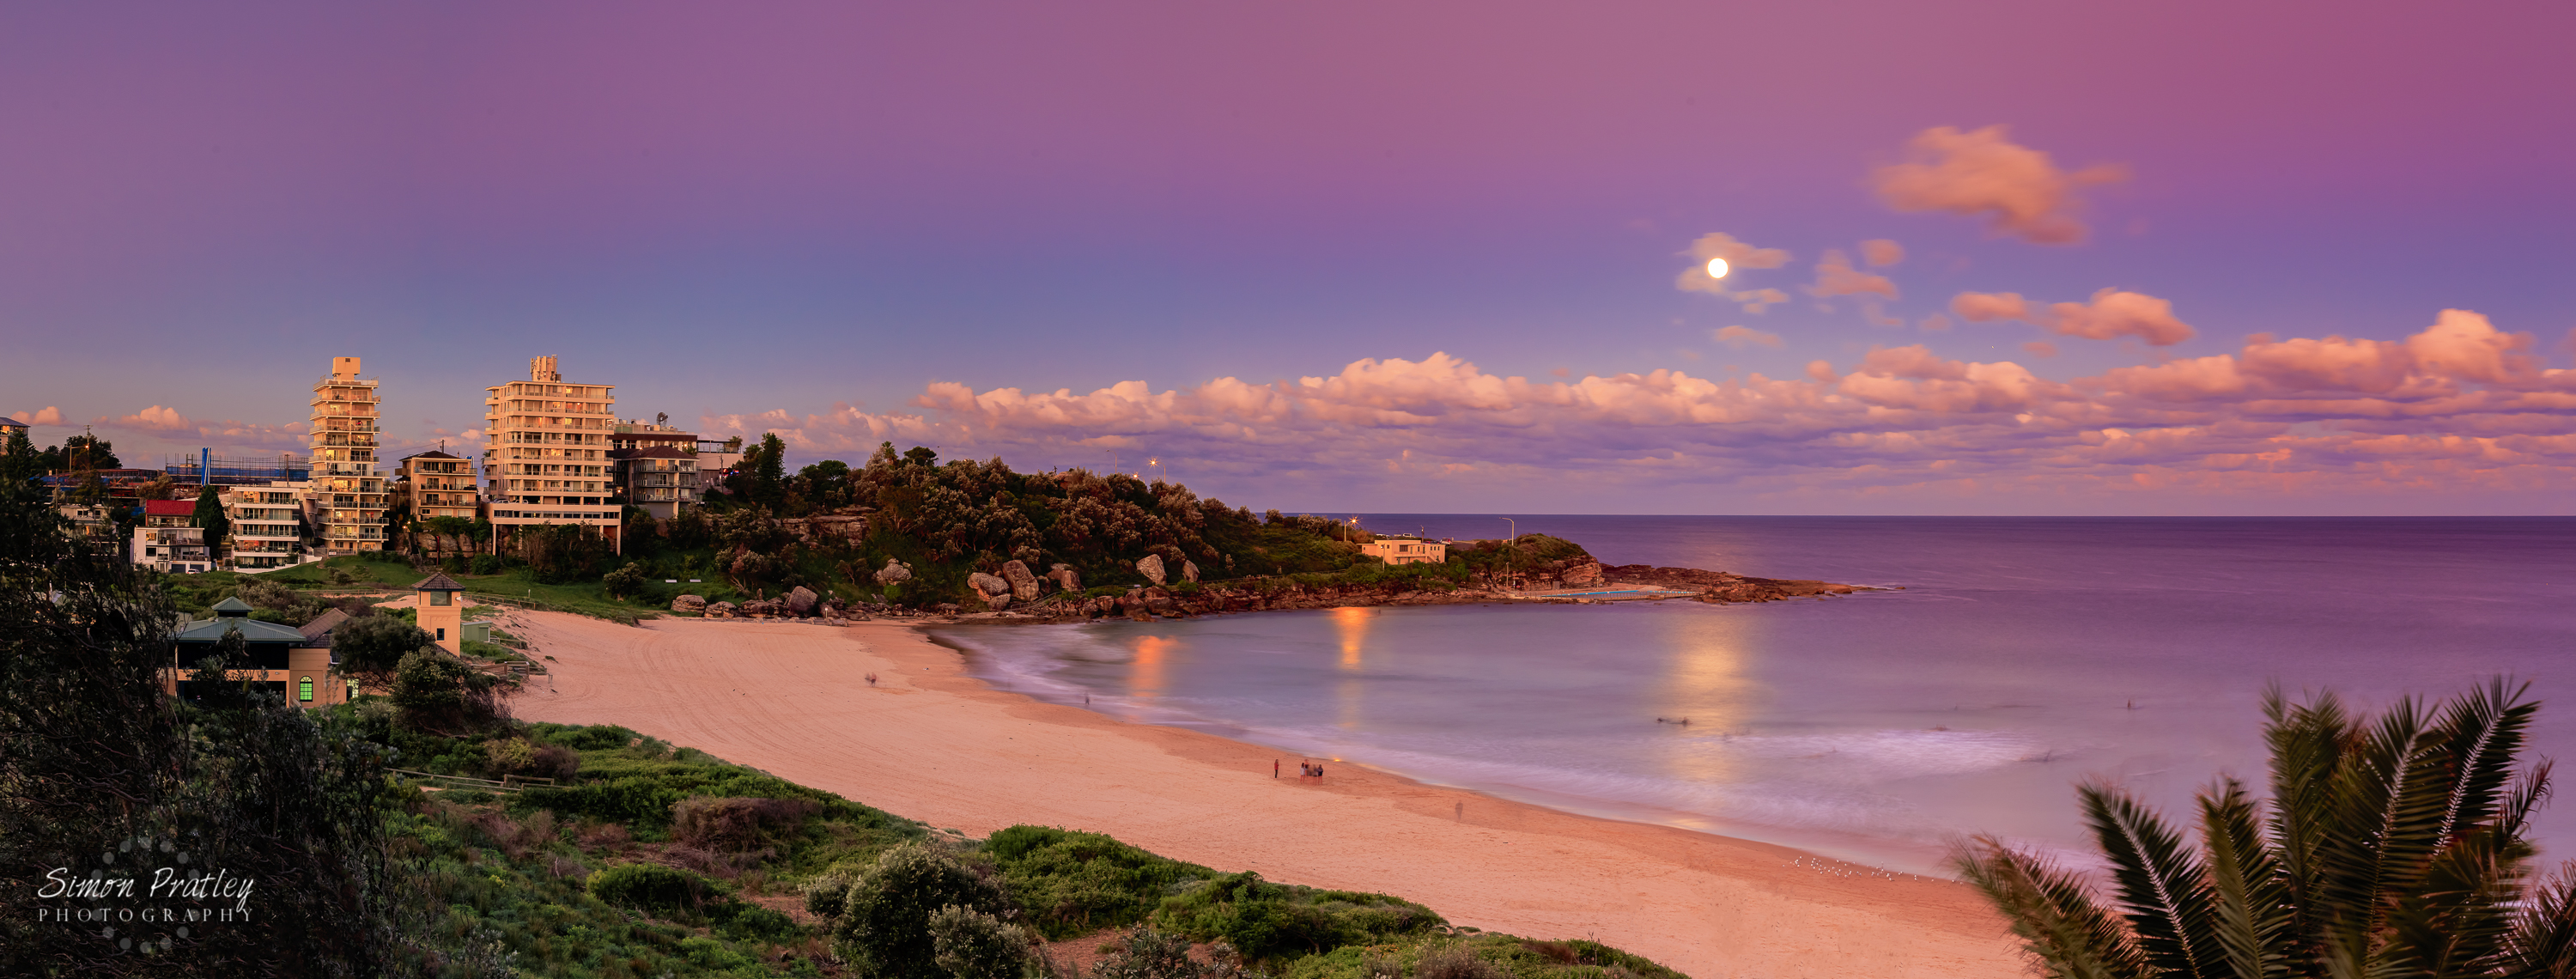 Just After Sunset at Freshwater Beach